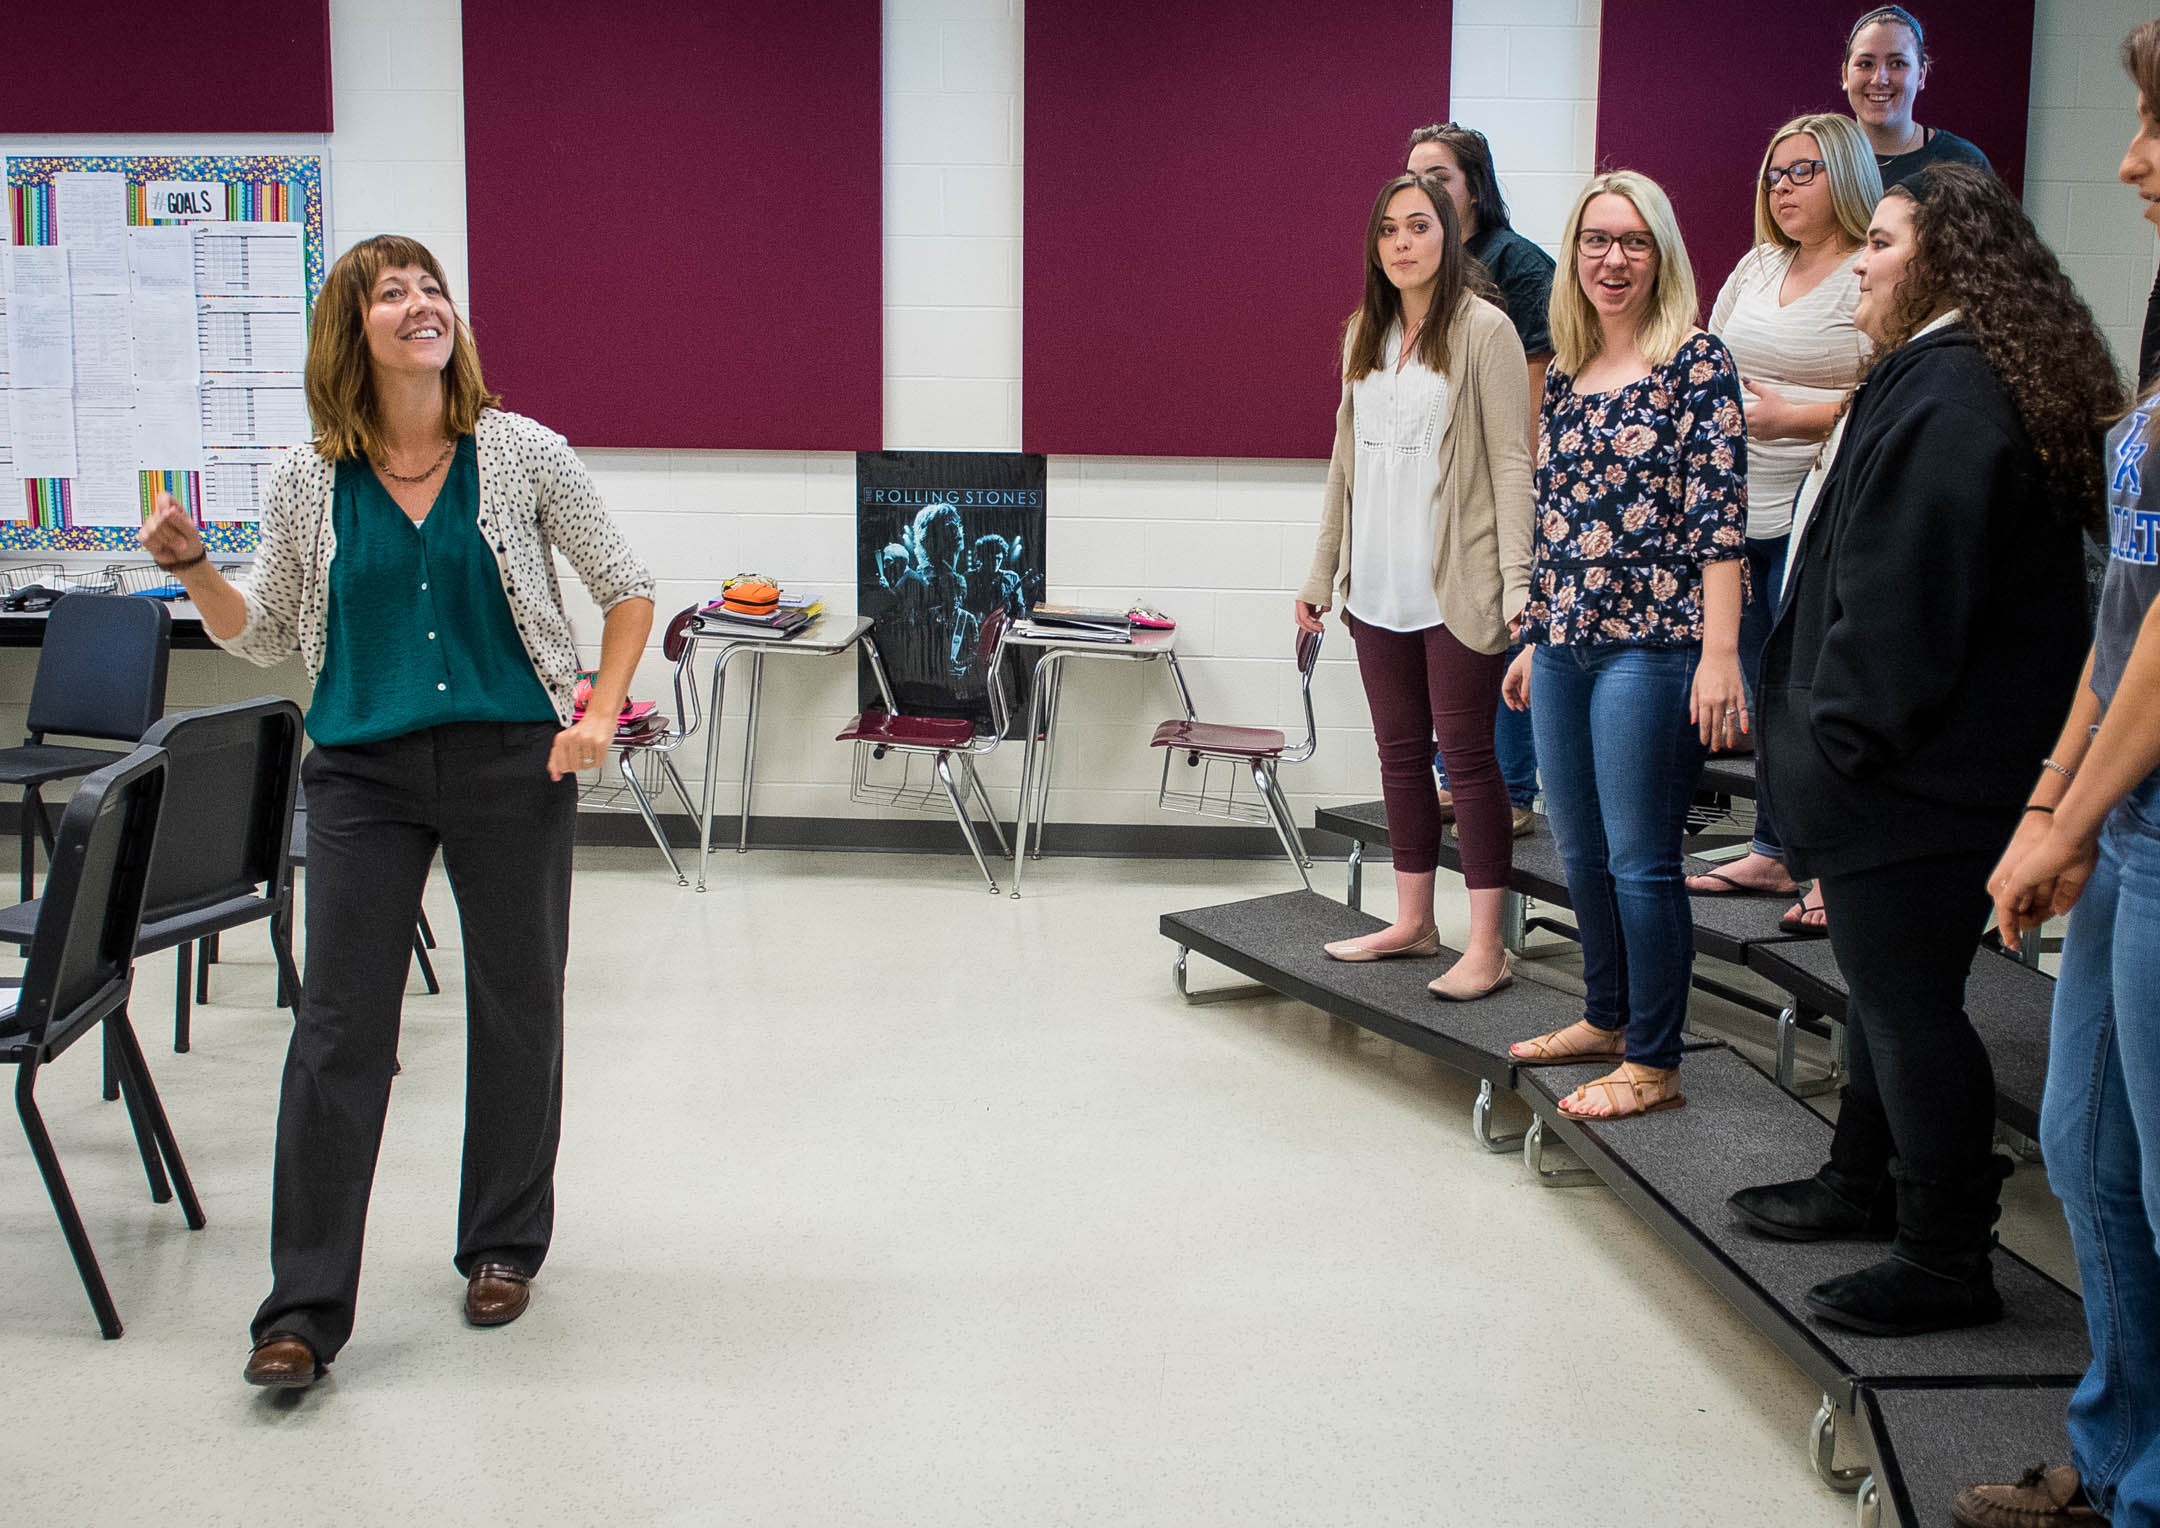 Kellie Clark directs her students while practicing a piece during class. Clark, the 2018 Kentucky Teacher of the Year, asked students what feelings the composer made them feel as a way to help them forge deeper connections to musical pieces. Photo by Bobby Ellis, April 21, 2017